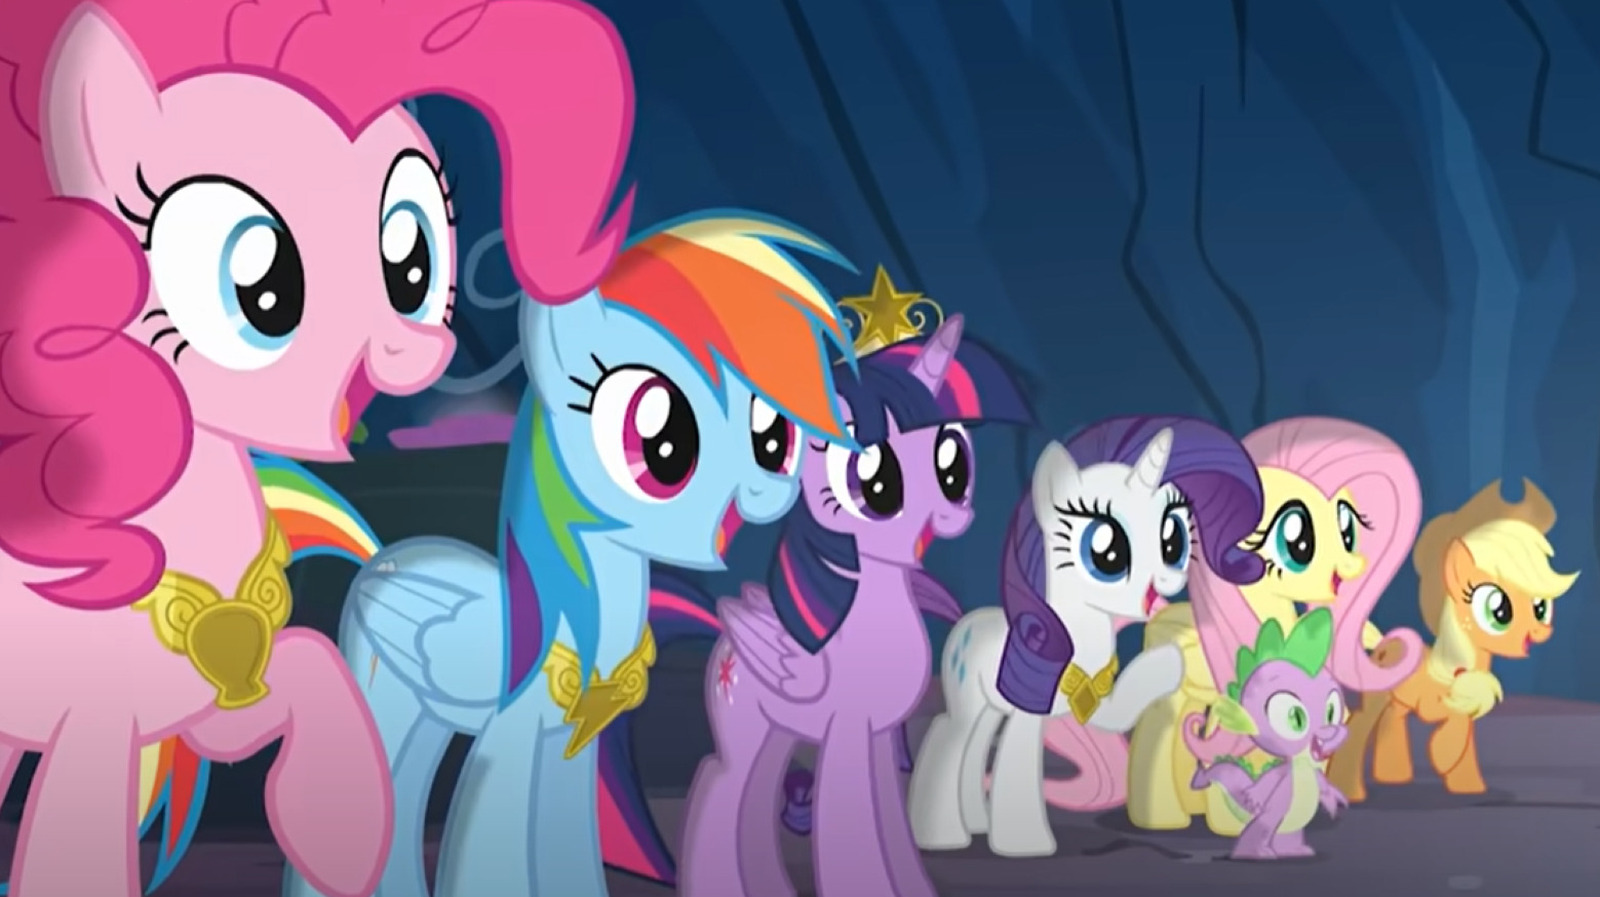 The mane six from my little pony